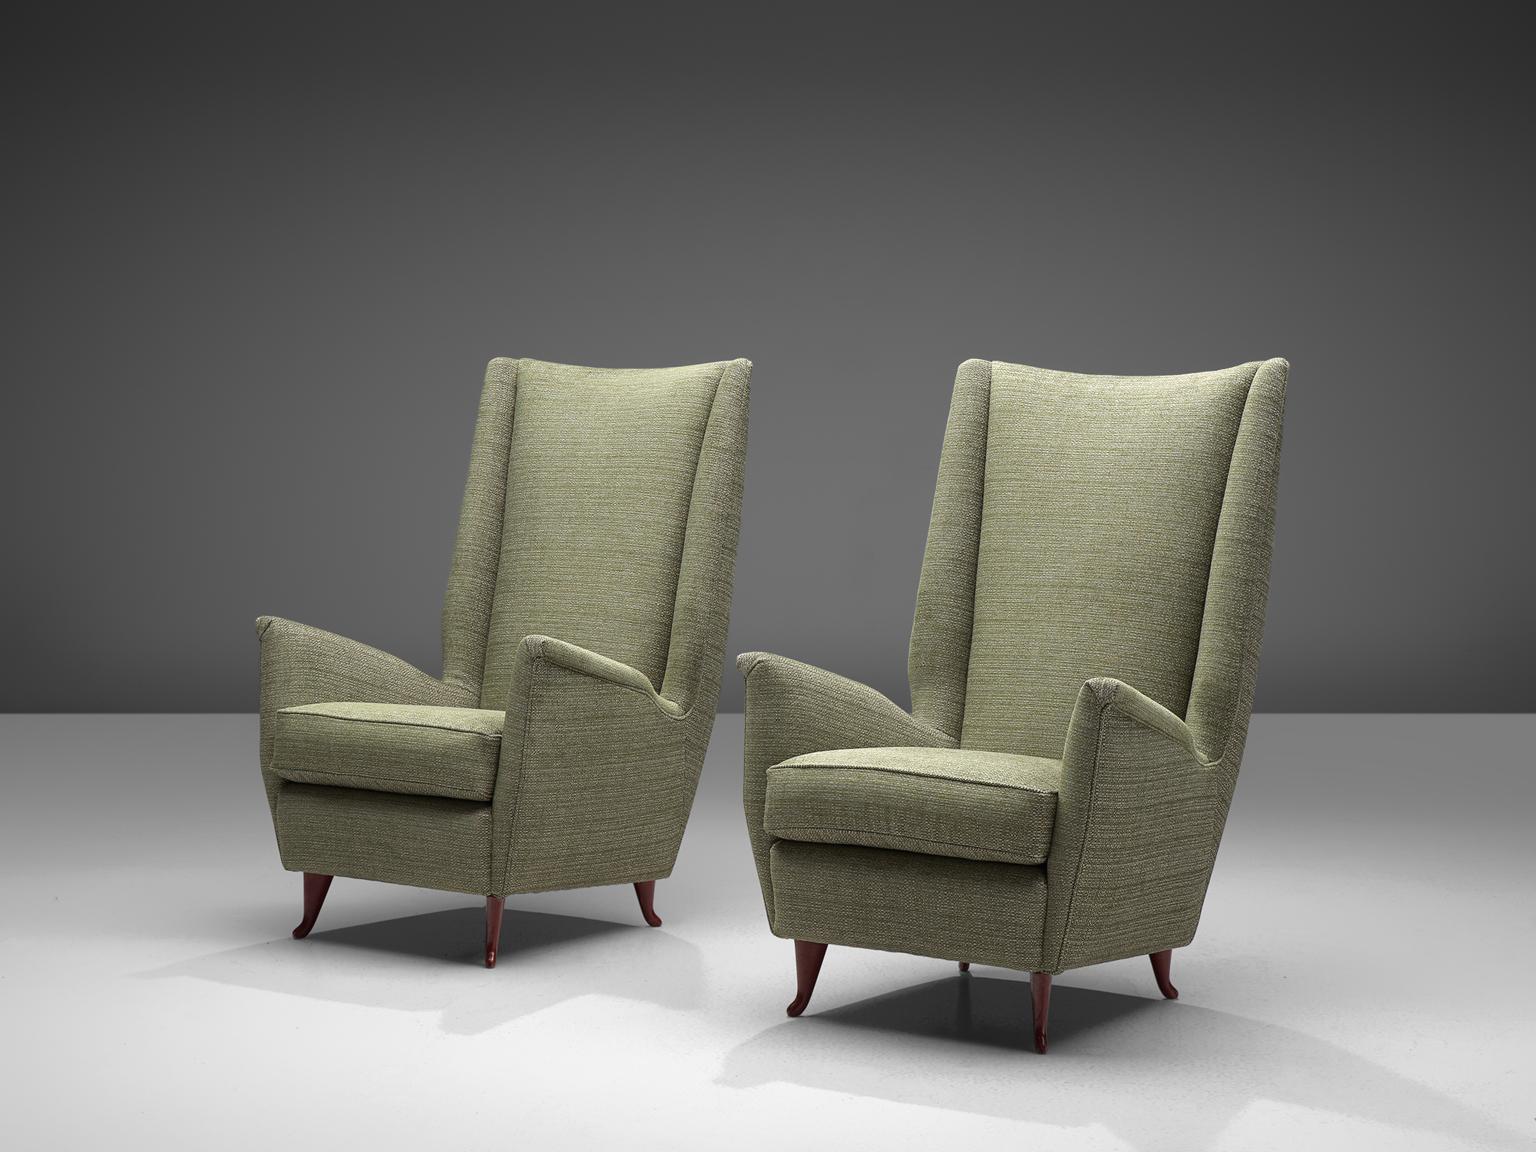 ISA, pair of lounge chairs, reupholstered in green fabric and wood, Italy, 1950s. 

An elegant pair of Italian Lounge chairs in the manner of Gio Ponti. What really characterizes this chairs is their high backs in combination with the lumbar support